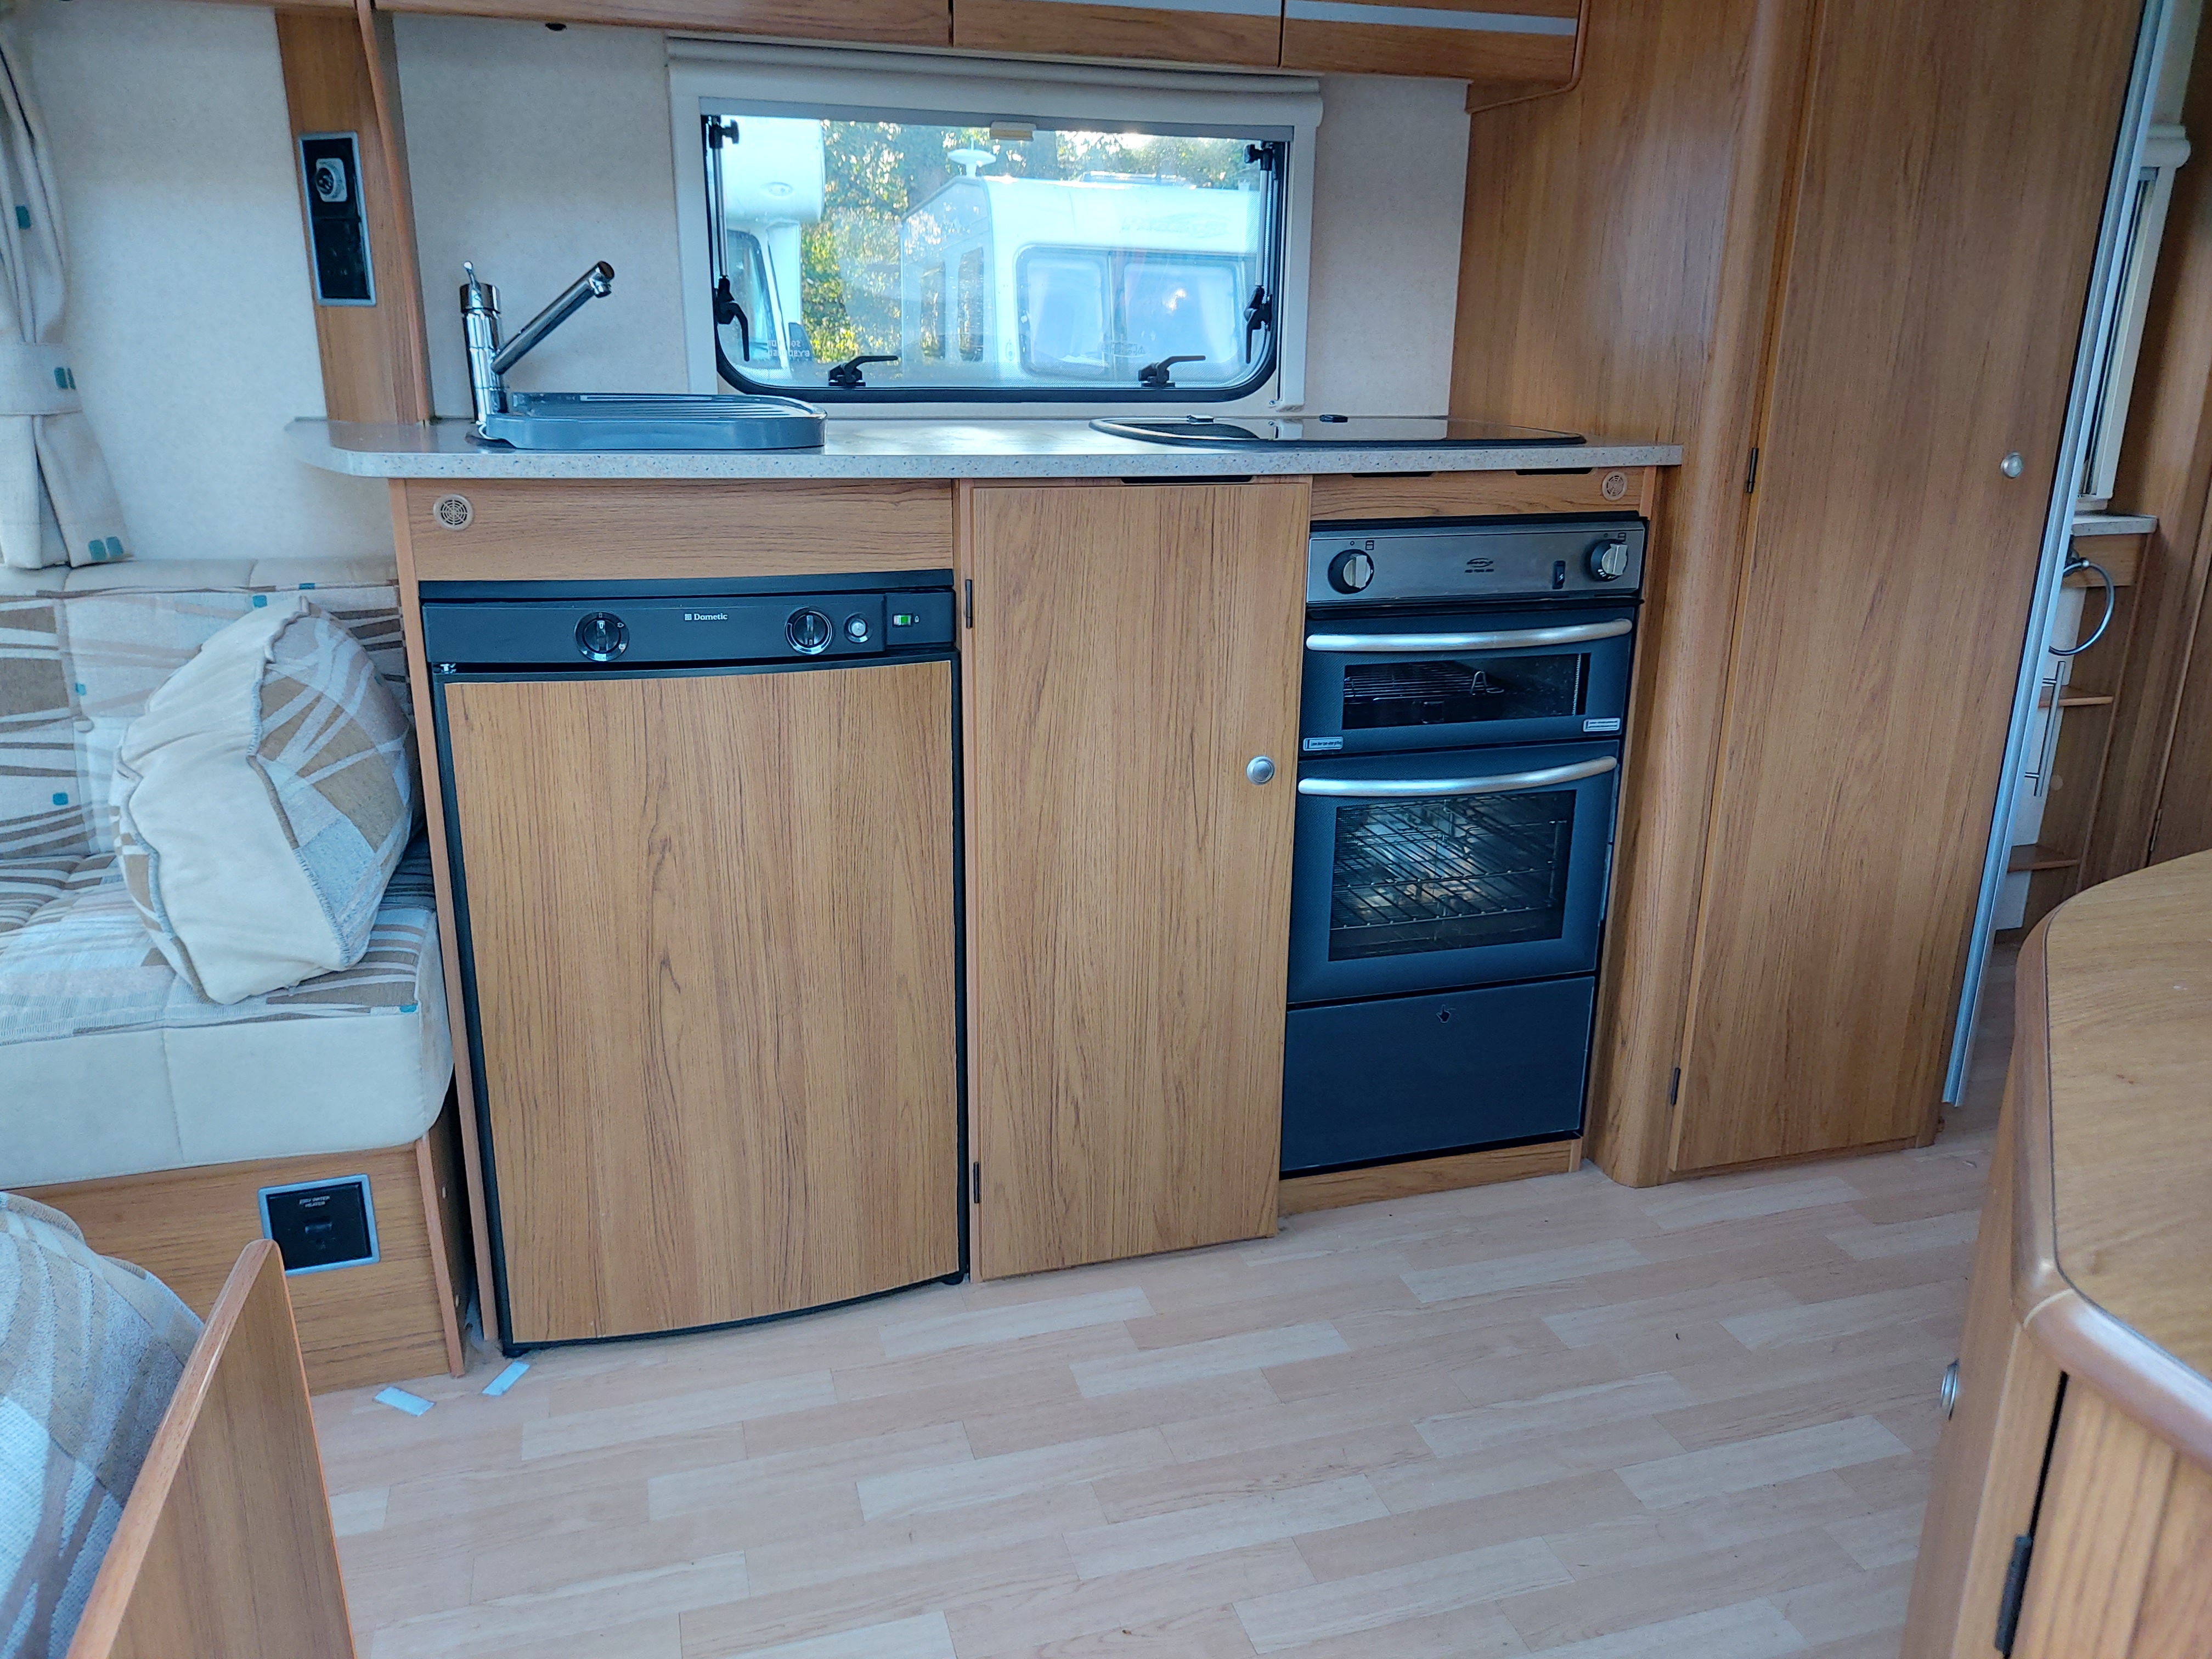 NOW SOLD 2009 Bailey Pageant Burgundy 4 Berth Fixed Bed Caravan, Motor Mover